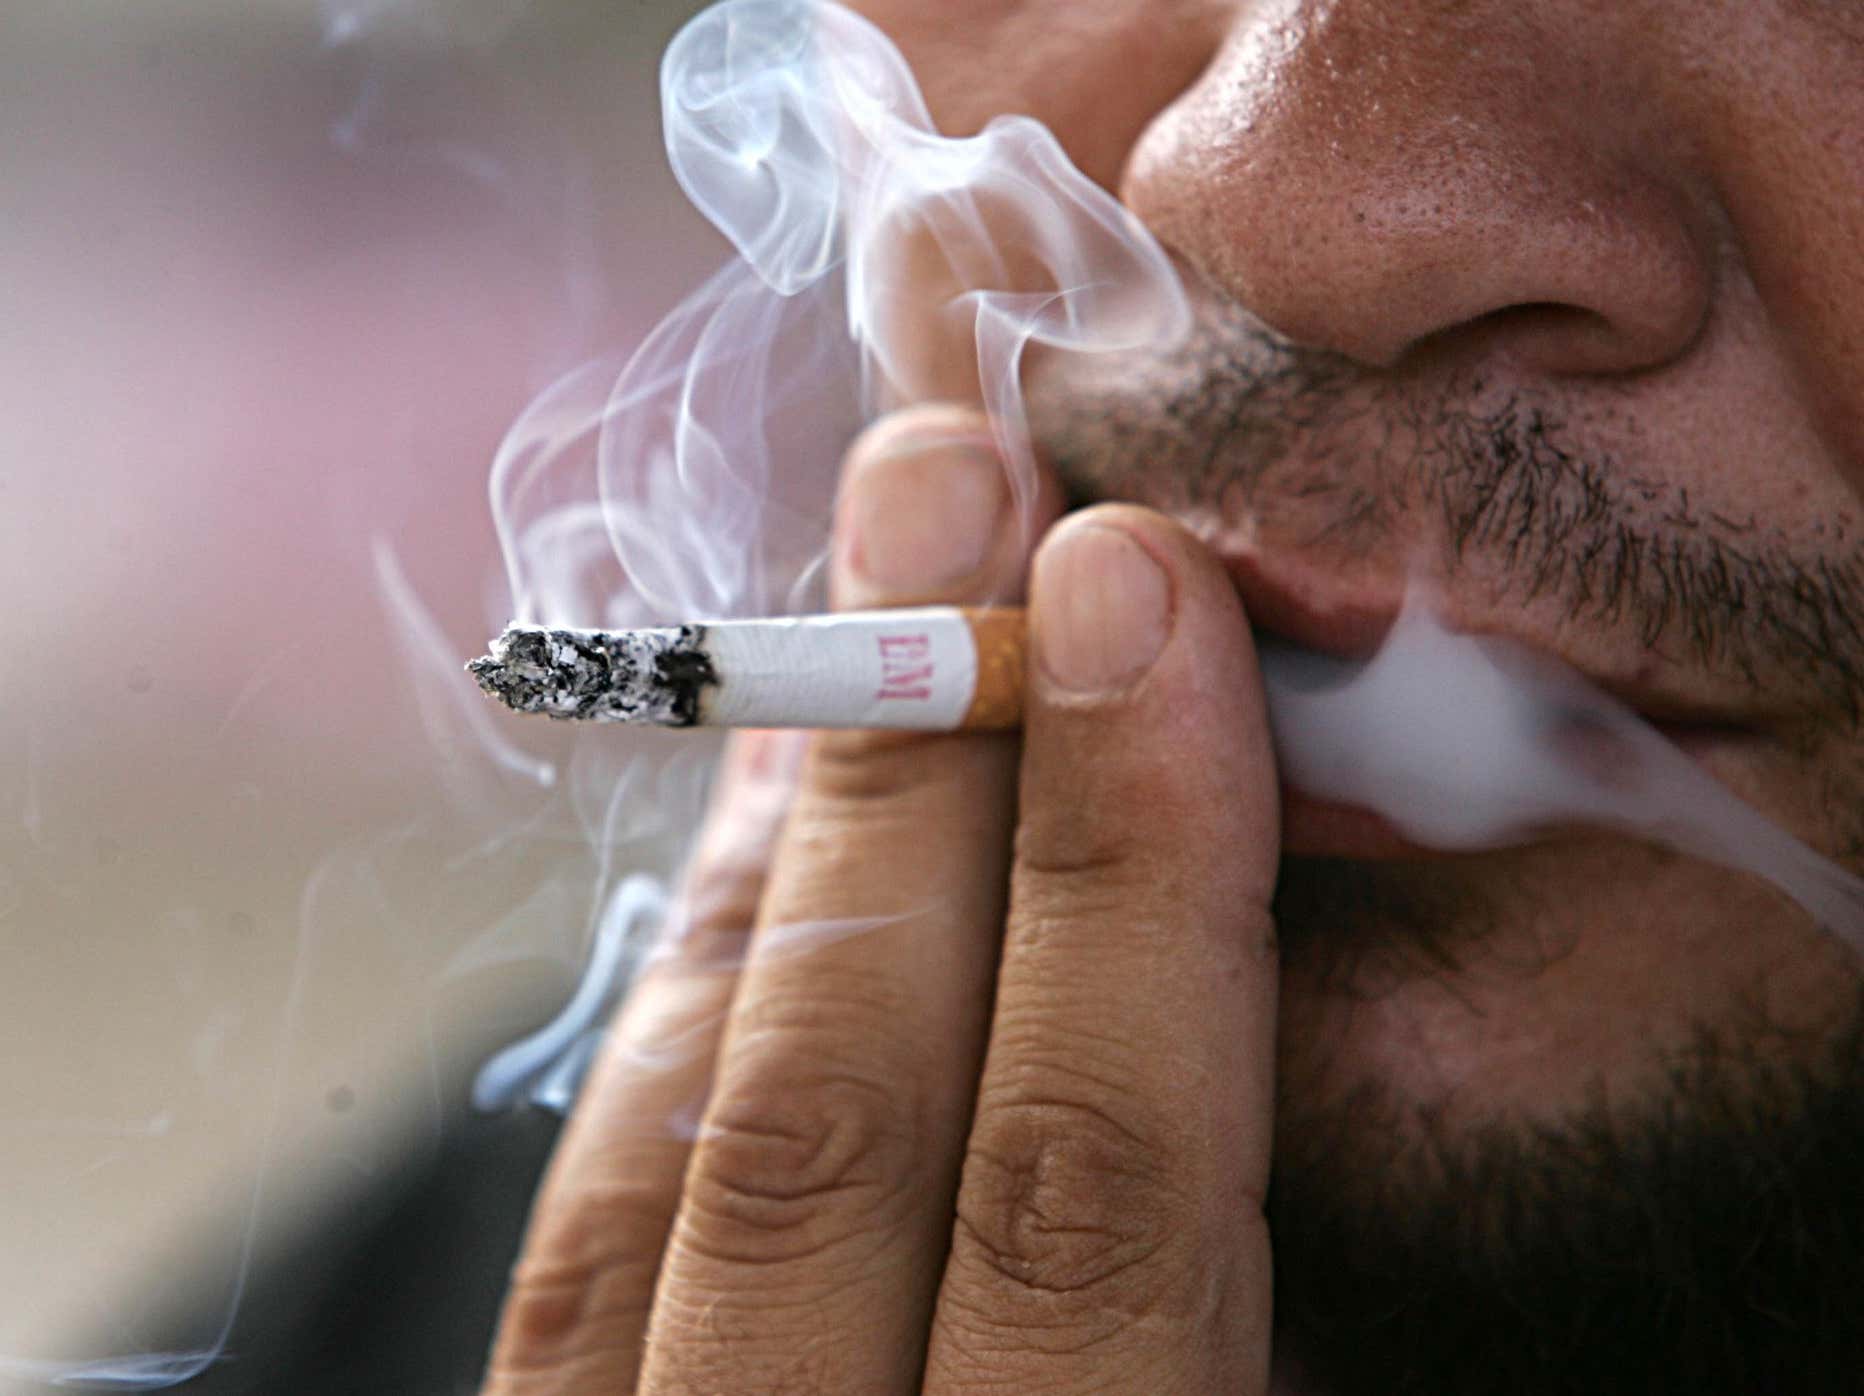 San Francisco Officially Bans Smoking Cigs Inside Of Your Own Apartment, Approves Weed